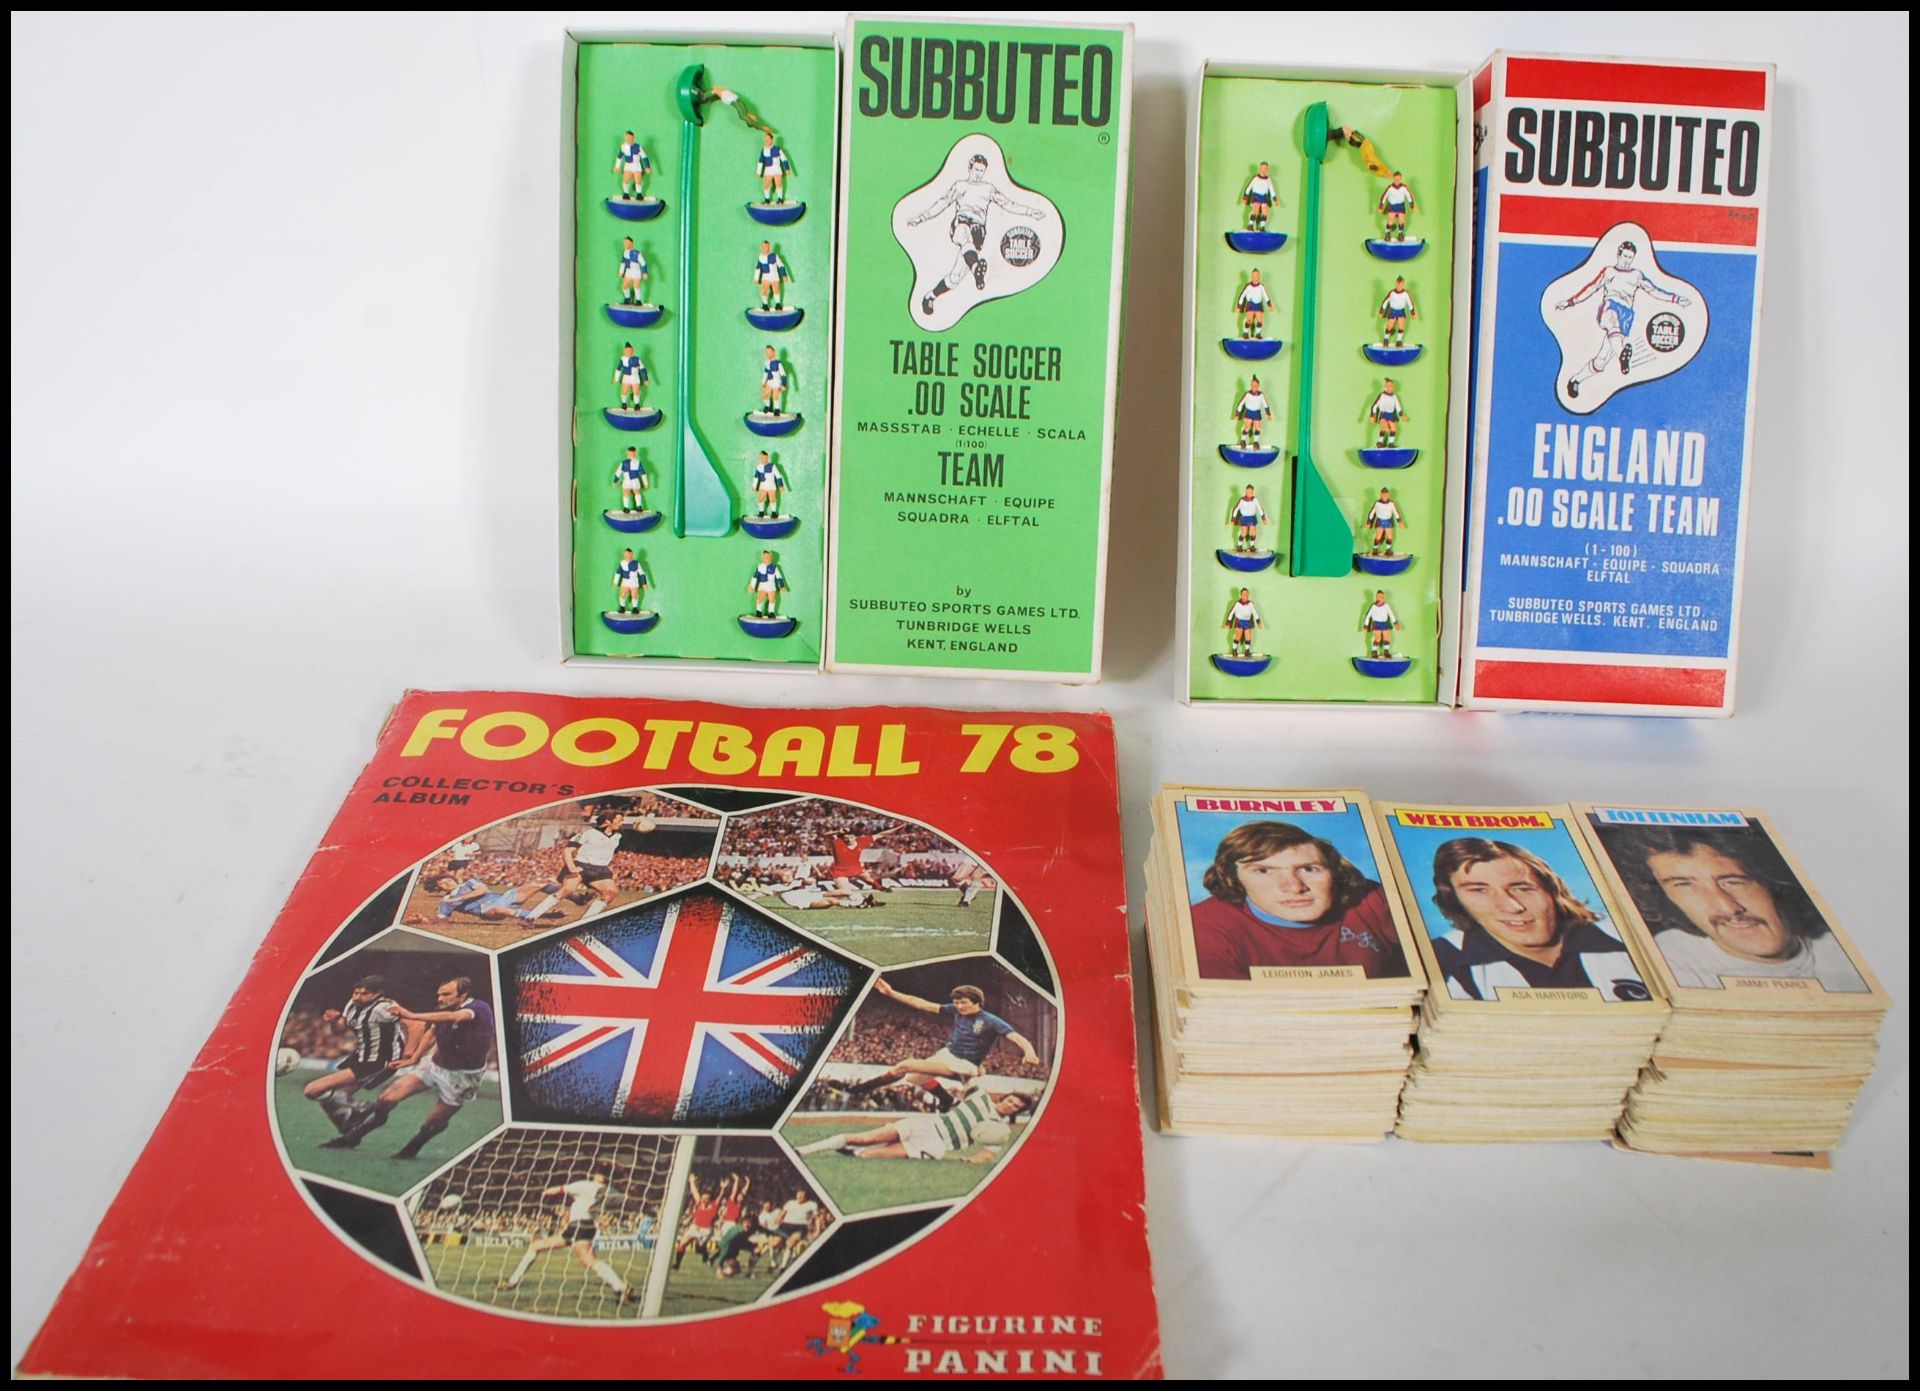 A Figurine Panini Football 78 collectors sticker album, the sticker album being complete together